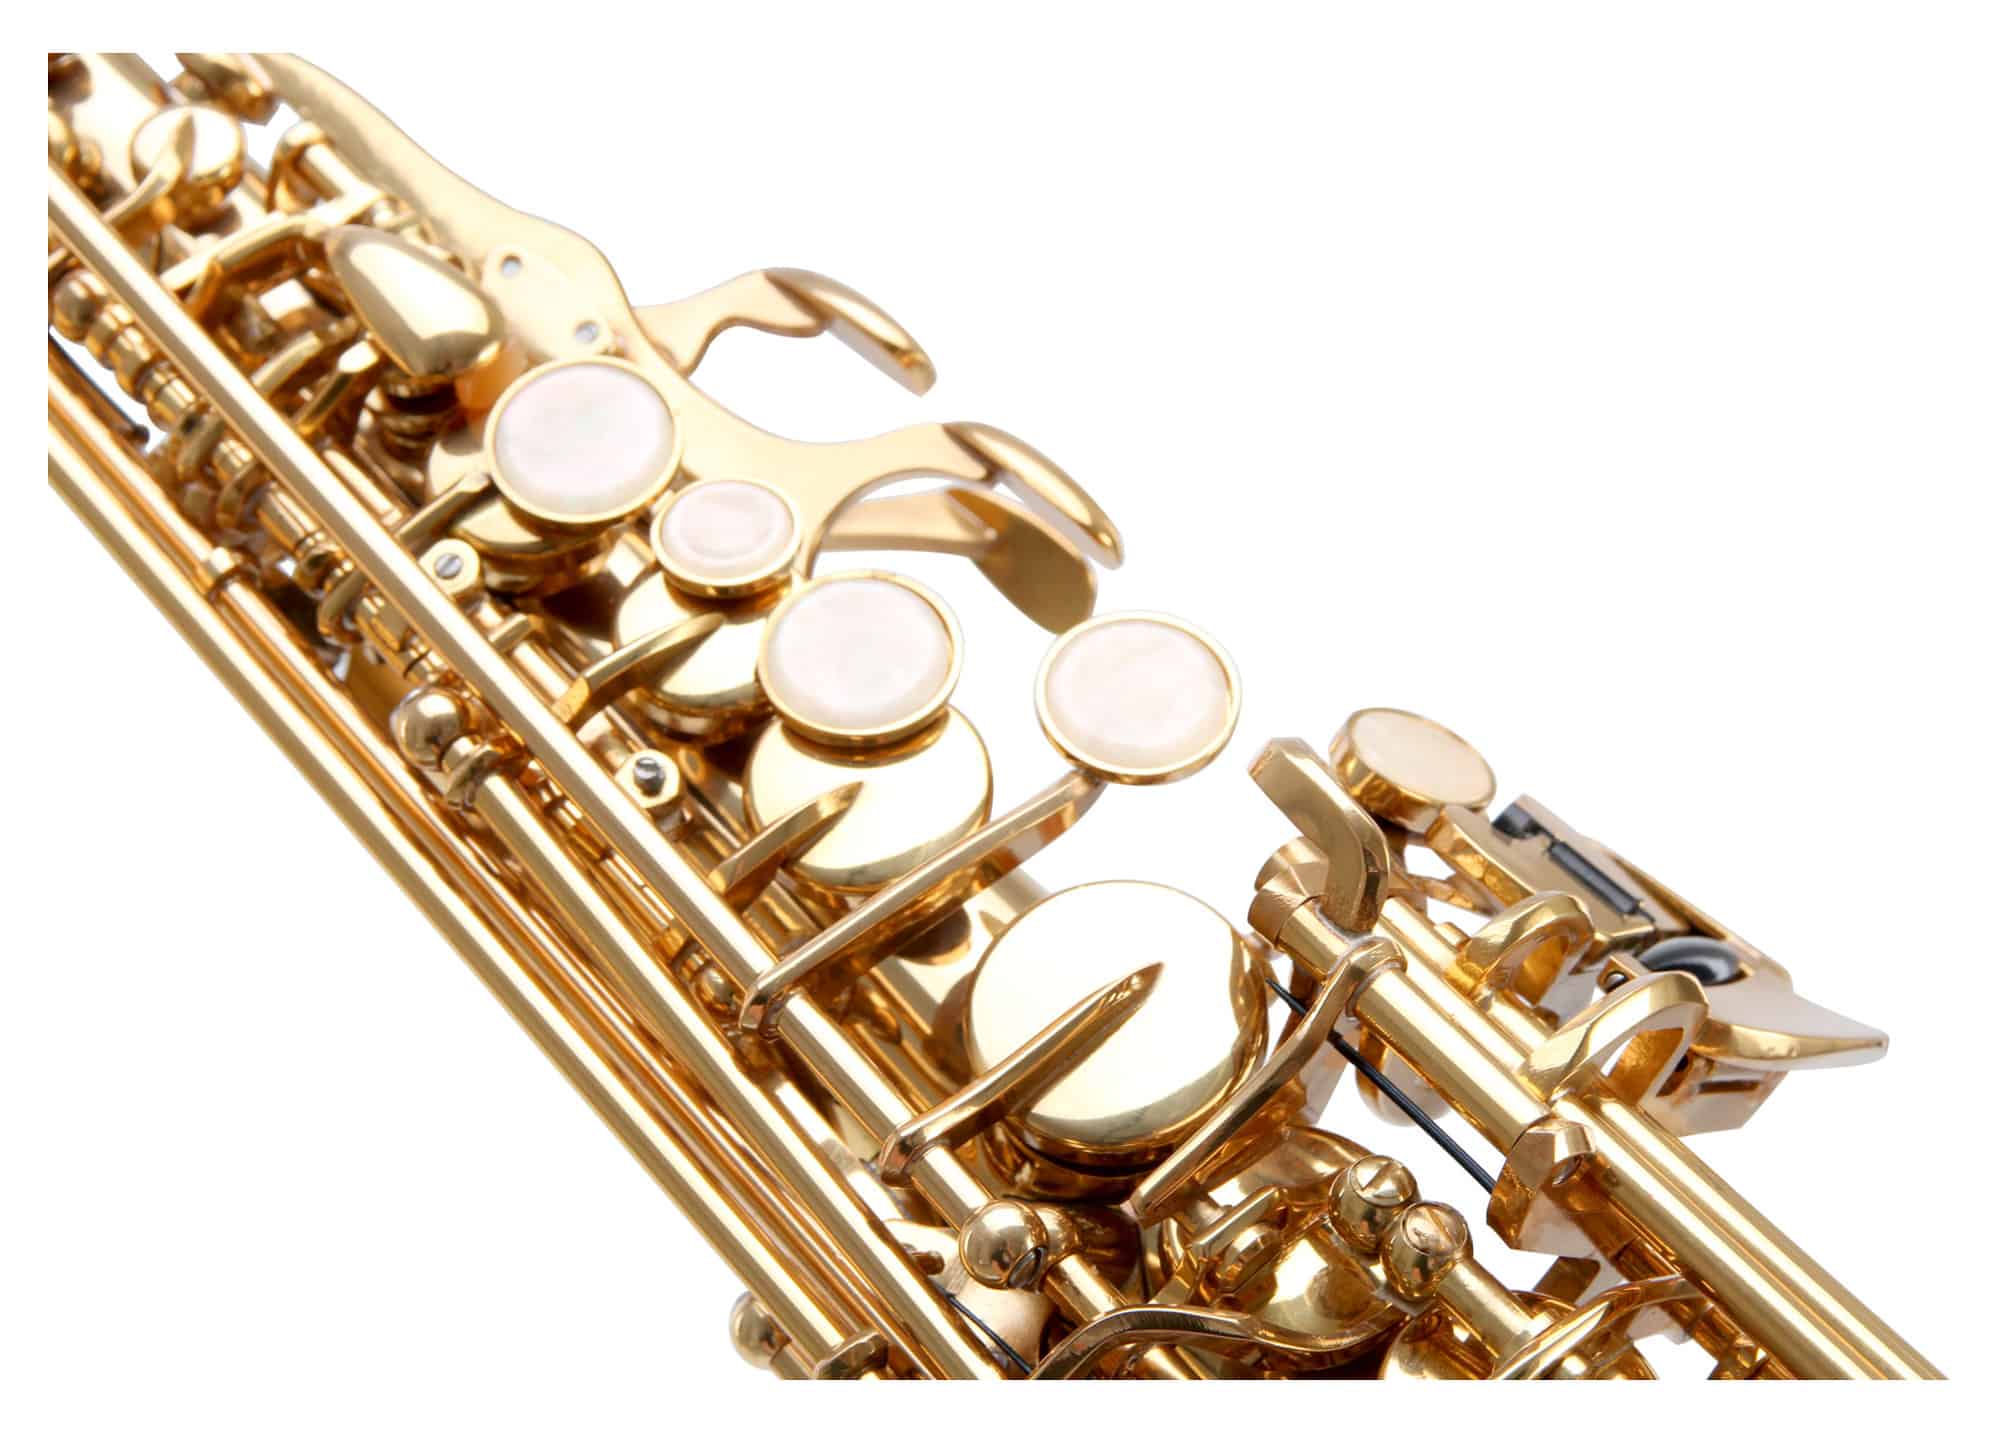 Classic Cantabile Winds SS-450 Bb saxophone soprano